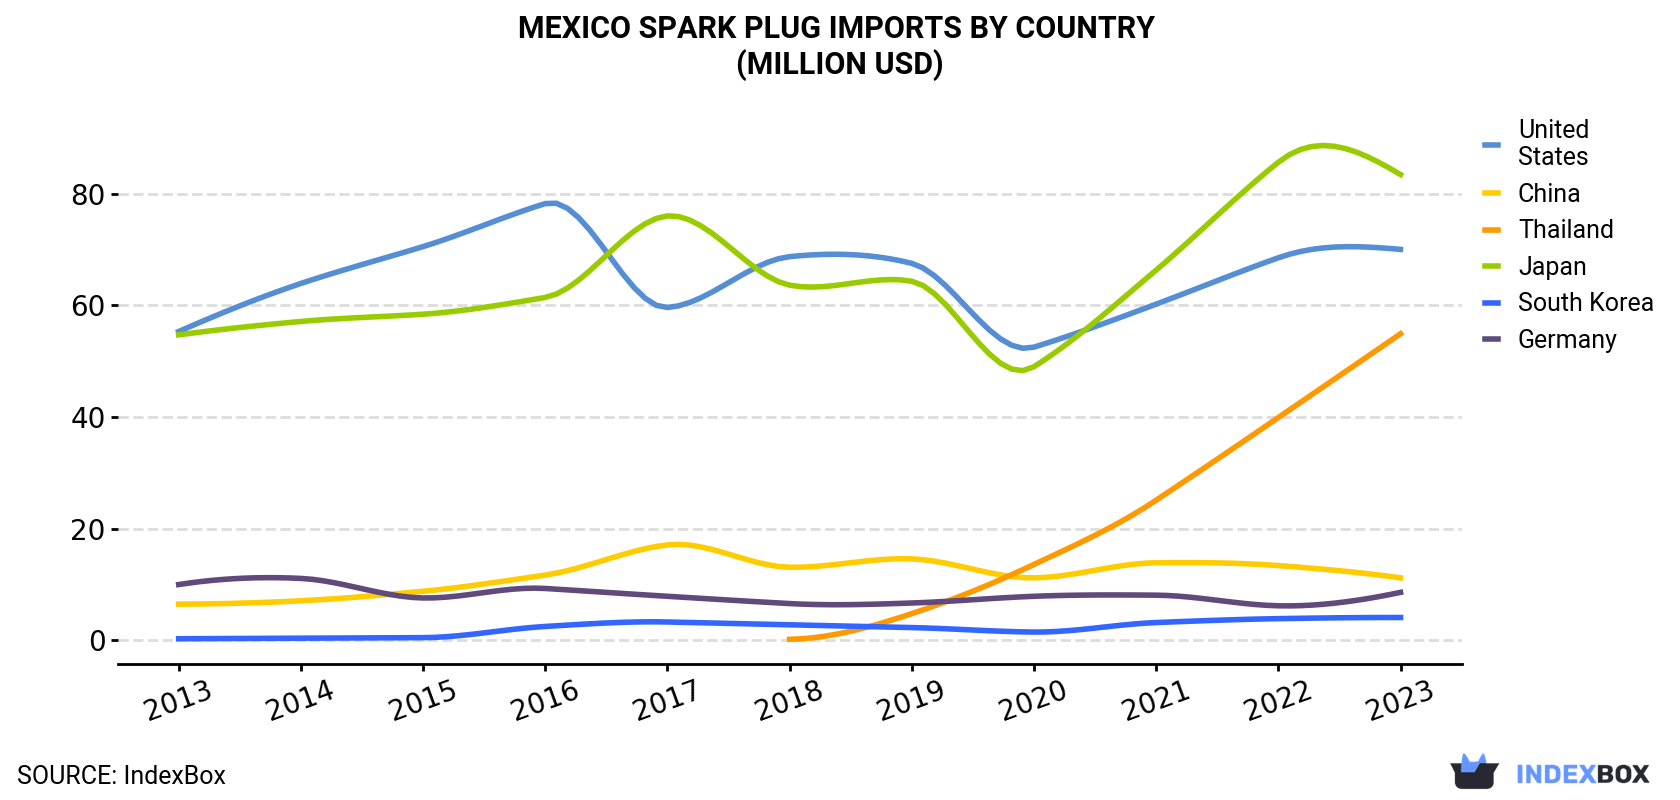 Mexico Spark Plug Imports By Country (Million USD)